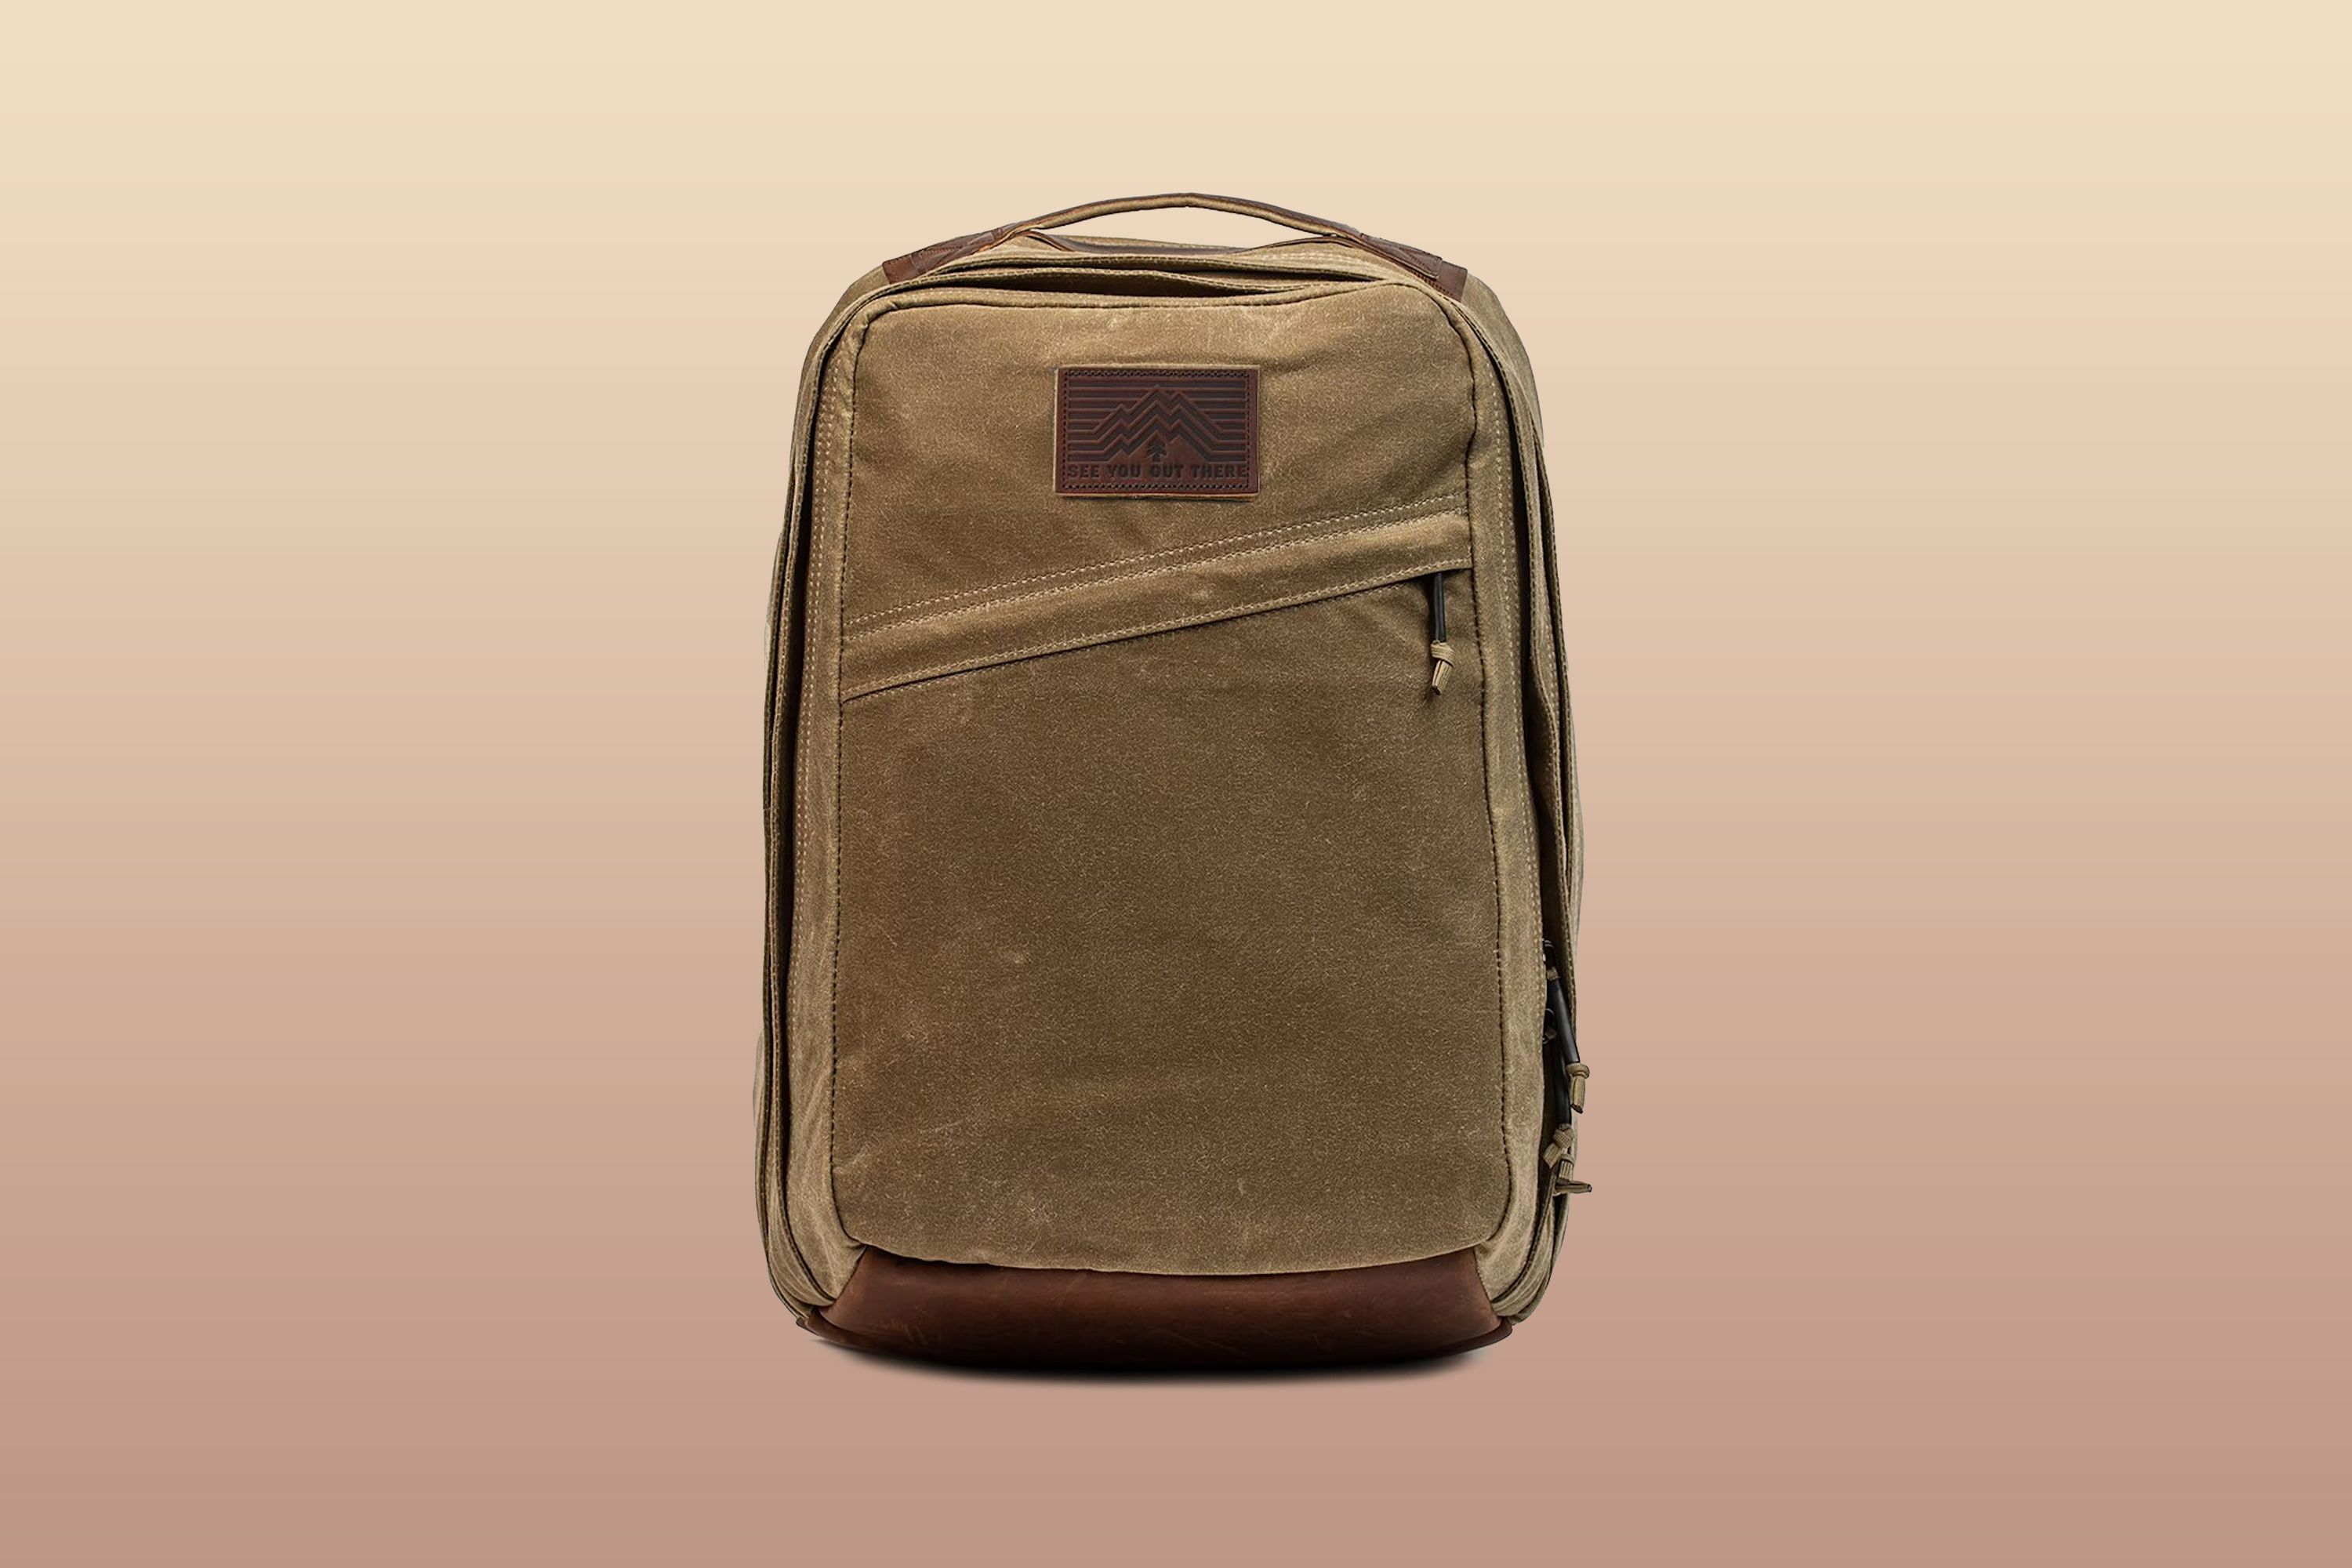 Get $100 Off a GoRuck Backpack at Huckberry